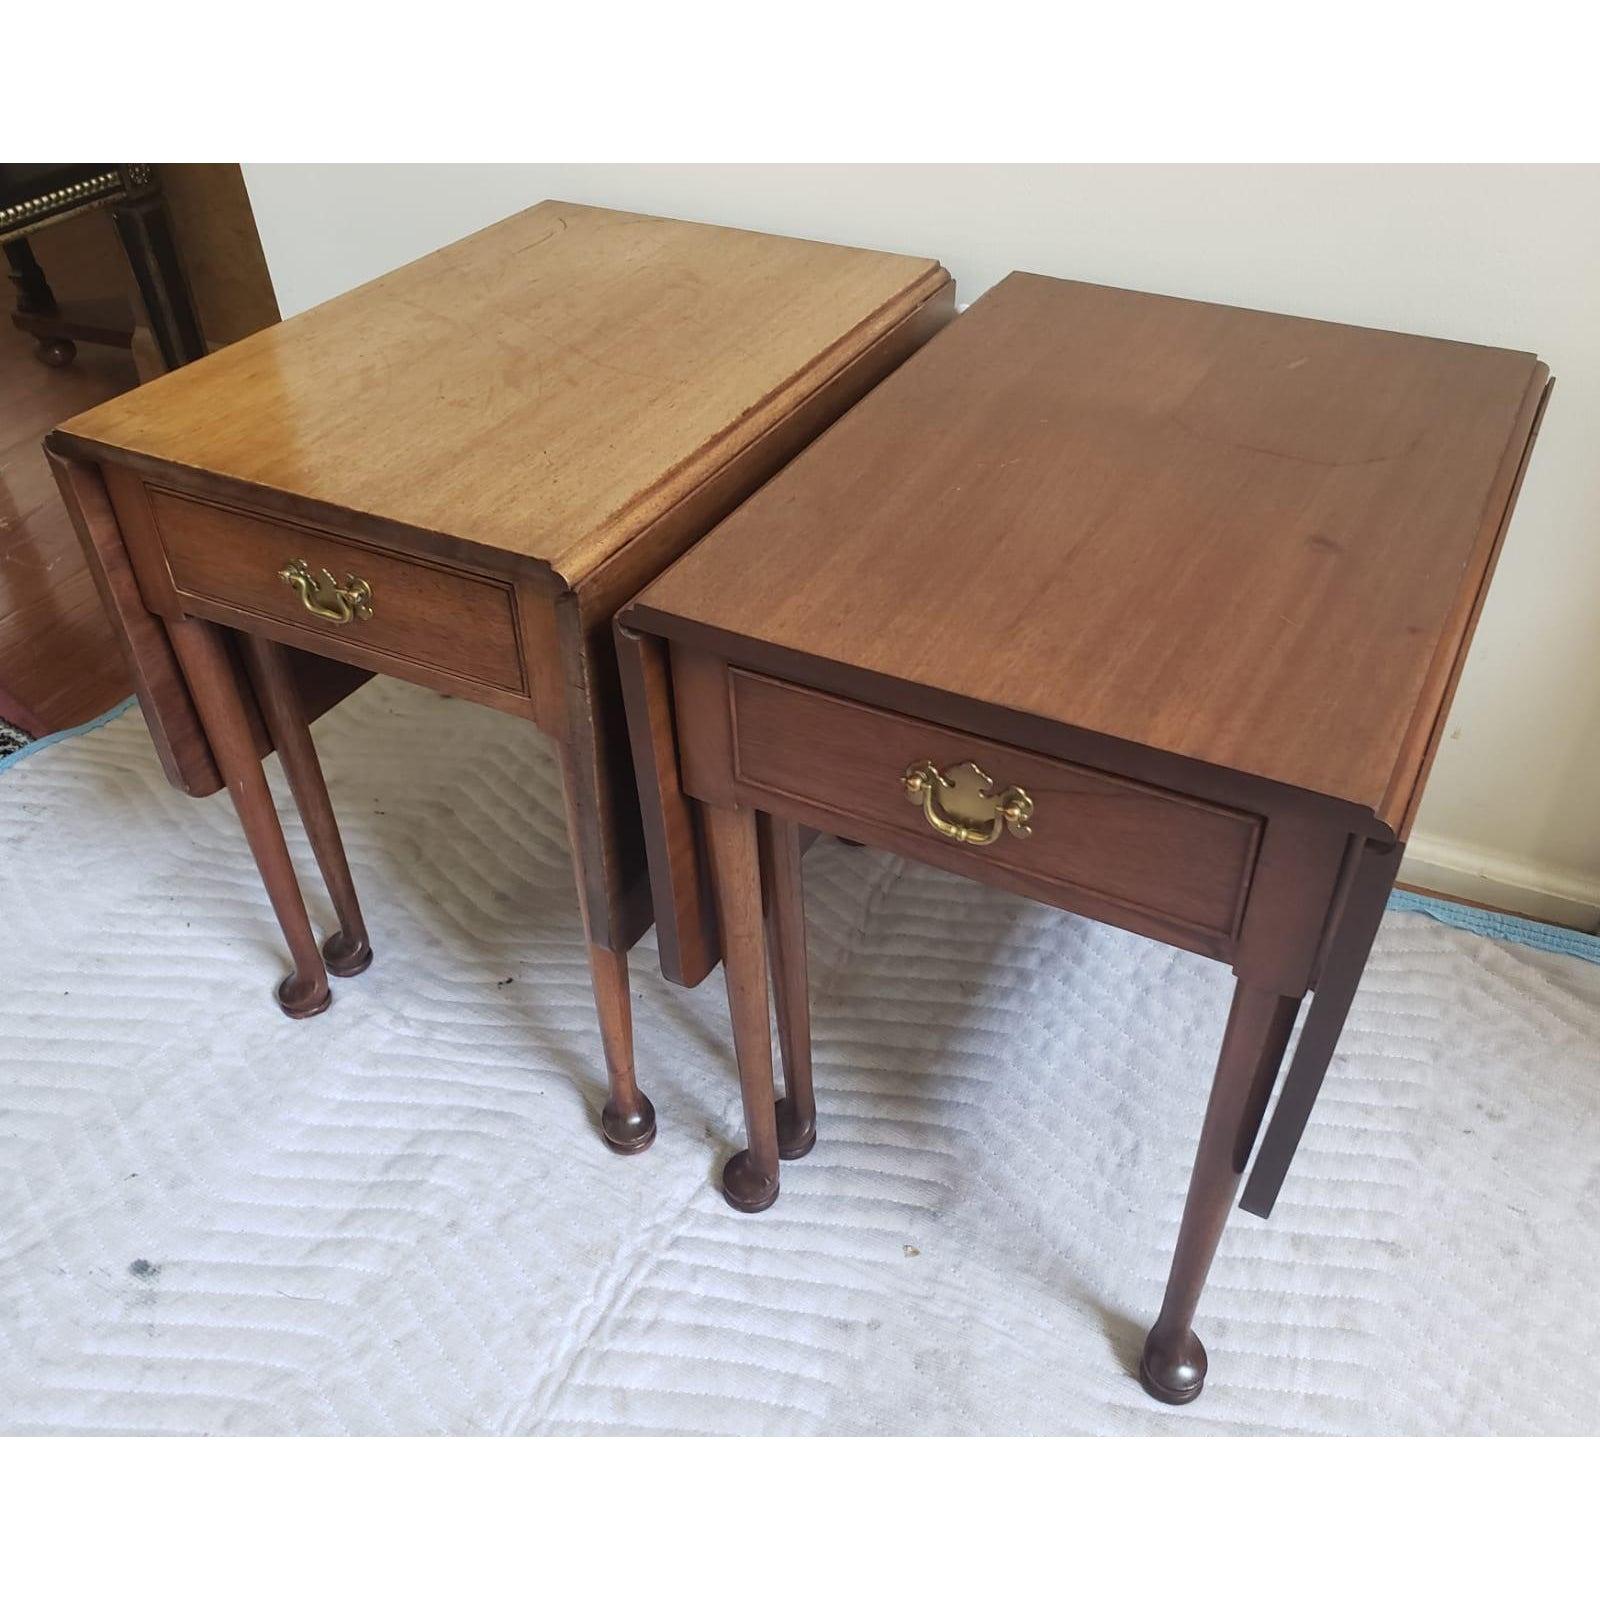 Biggs Richmond, a division of the famous Kittinger Furniture, pair of chippendale mahogany small drop leaf table pembroke table. Tables are in excellent structural condition with some finish loss. No obvious scratches.
Table measures 15